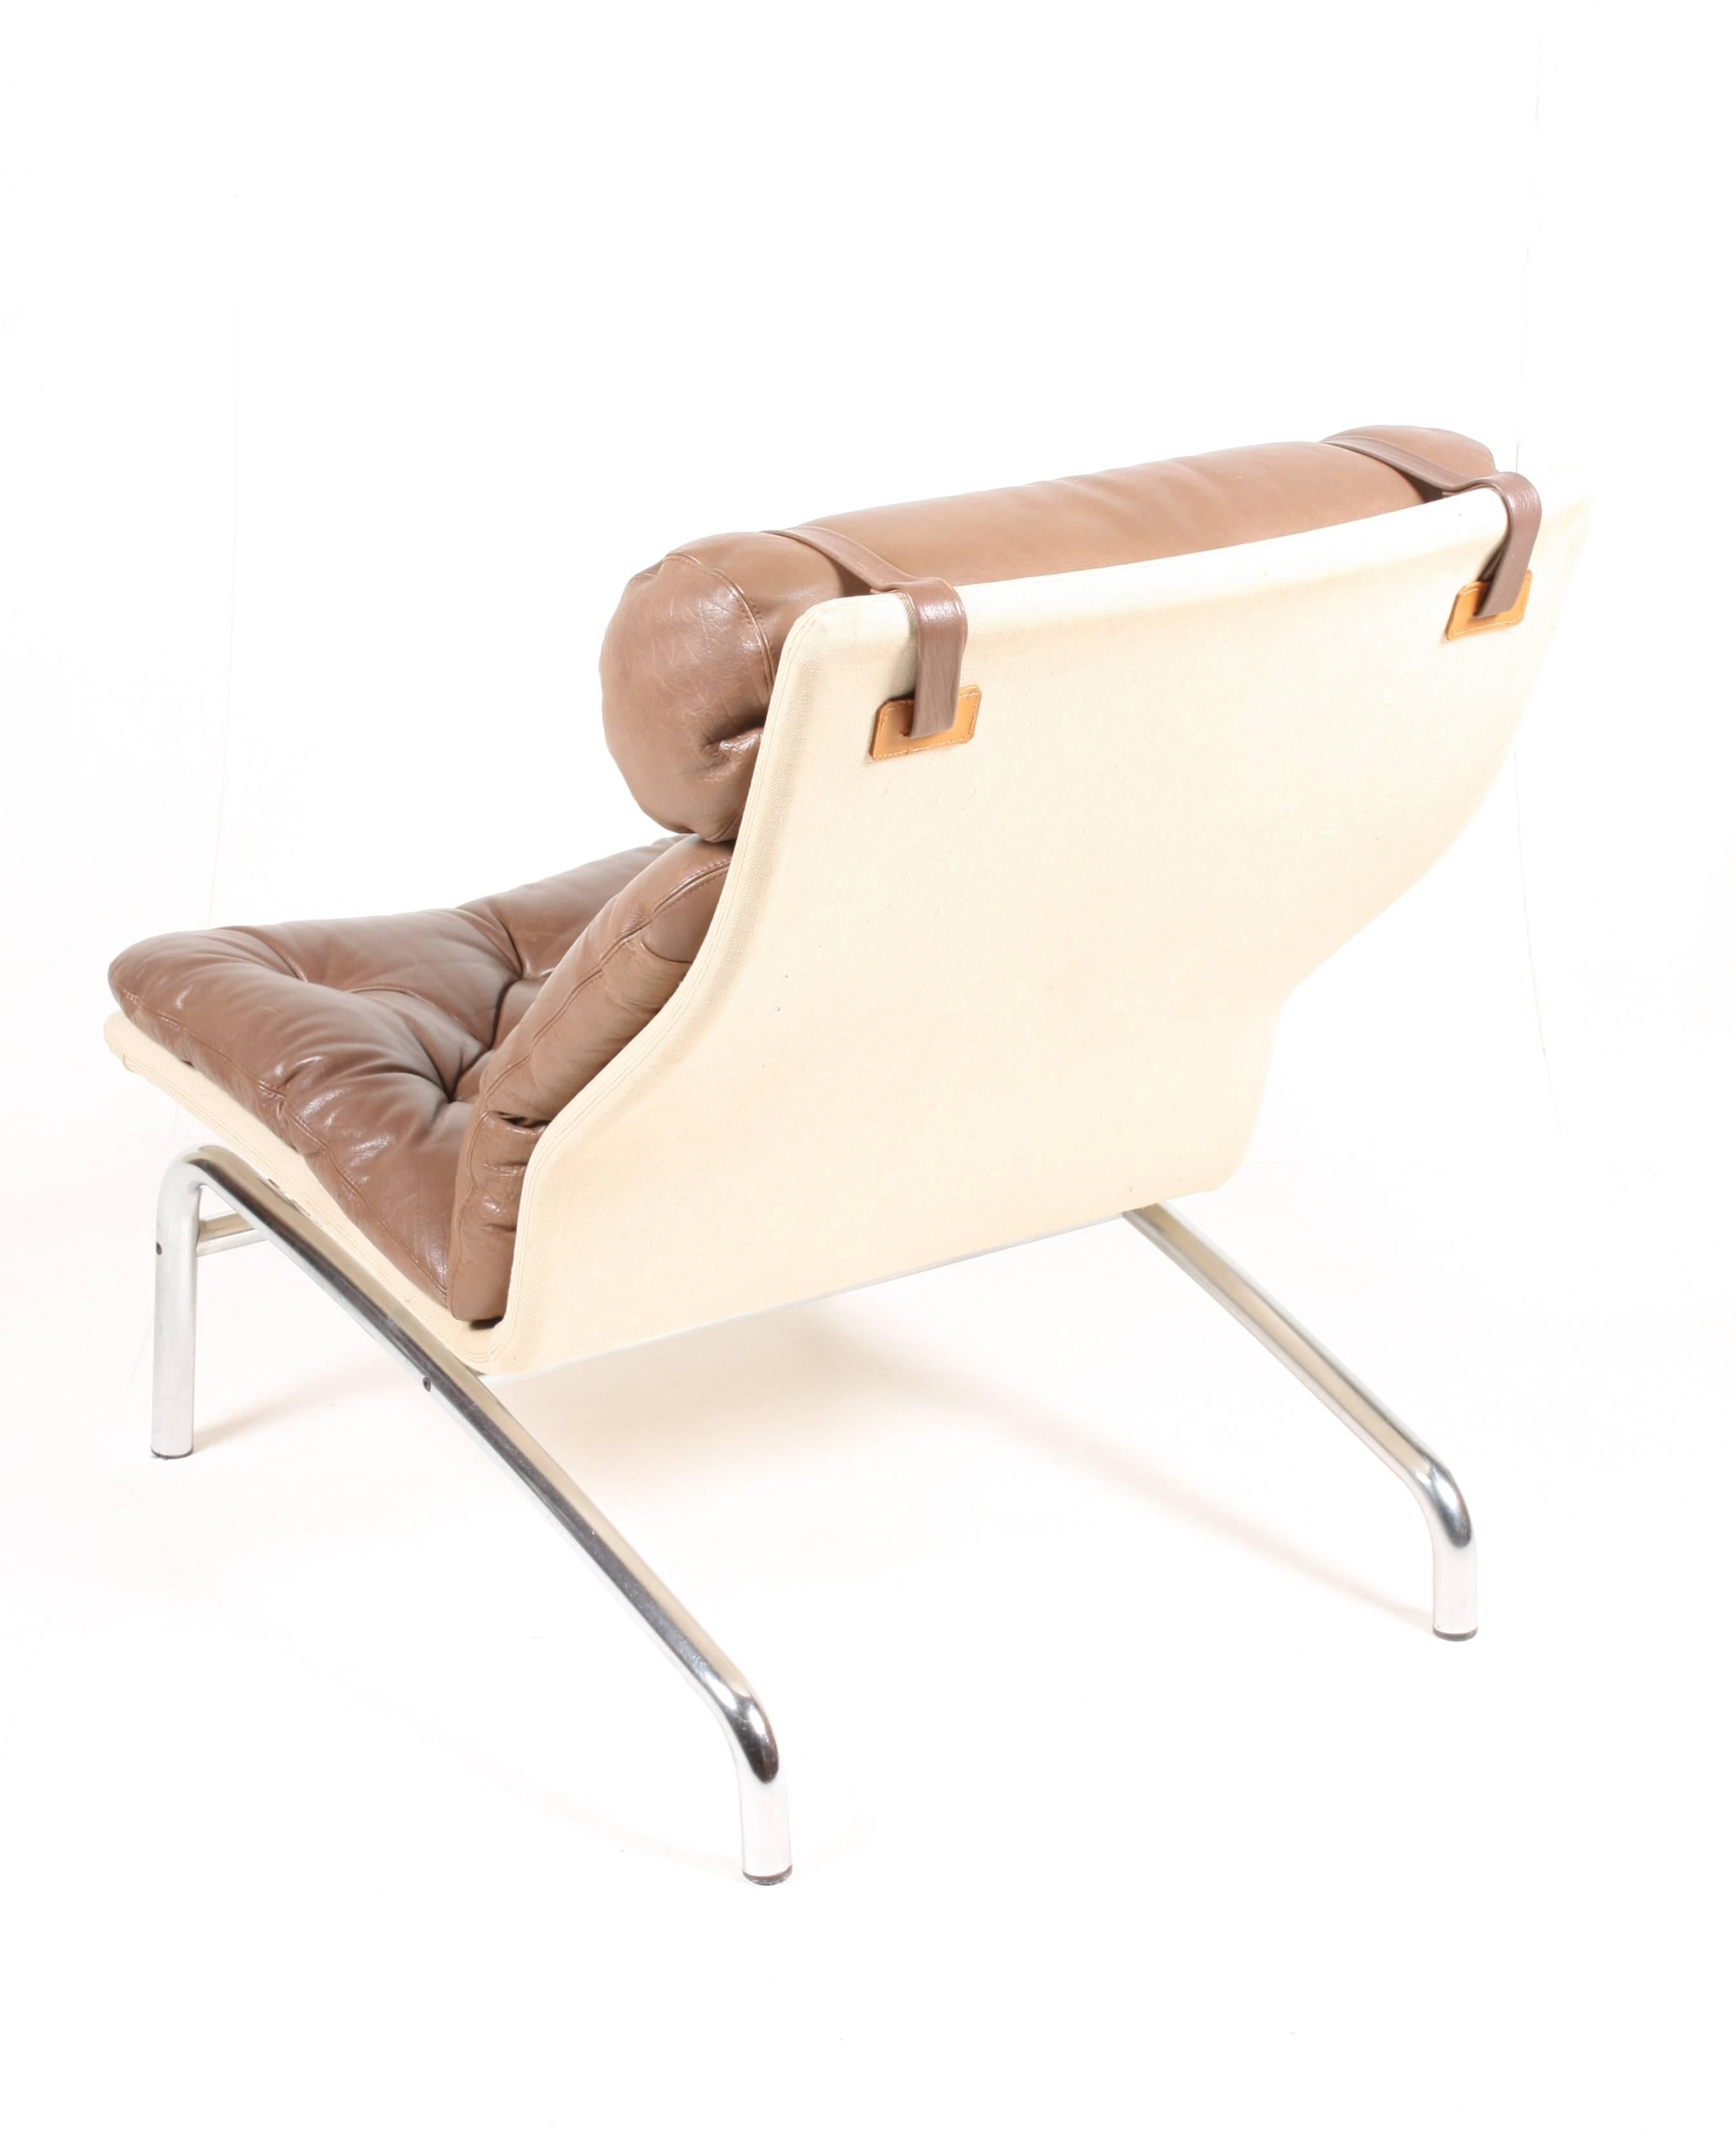 Lounge chair in leather, canvas on a metal frame. Designed by Arne Vodder for Erik Jørgensen. Made in Denmark in the 1970s great condition.